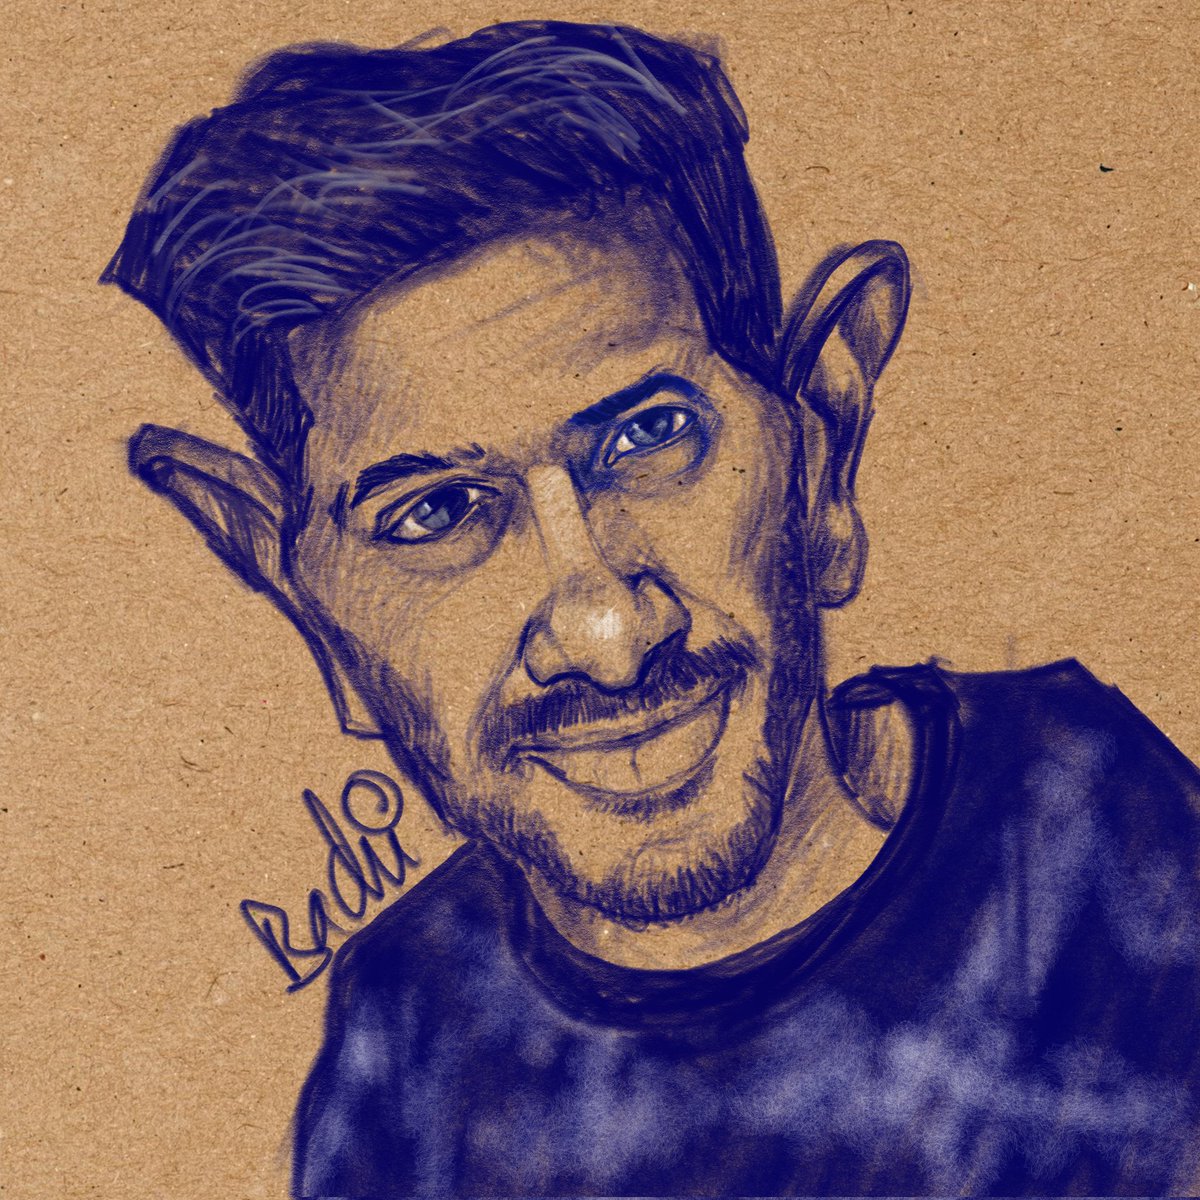 Caricature #caricature #caricaturesbybadri #DulquerSalmaan #actor #Indianfilms #art #digitalart #drawing #openforcommissions #commissionsopen